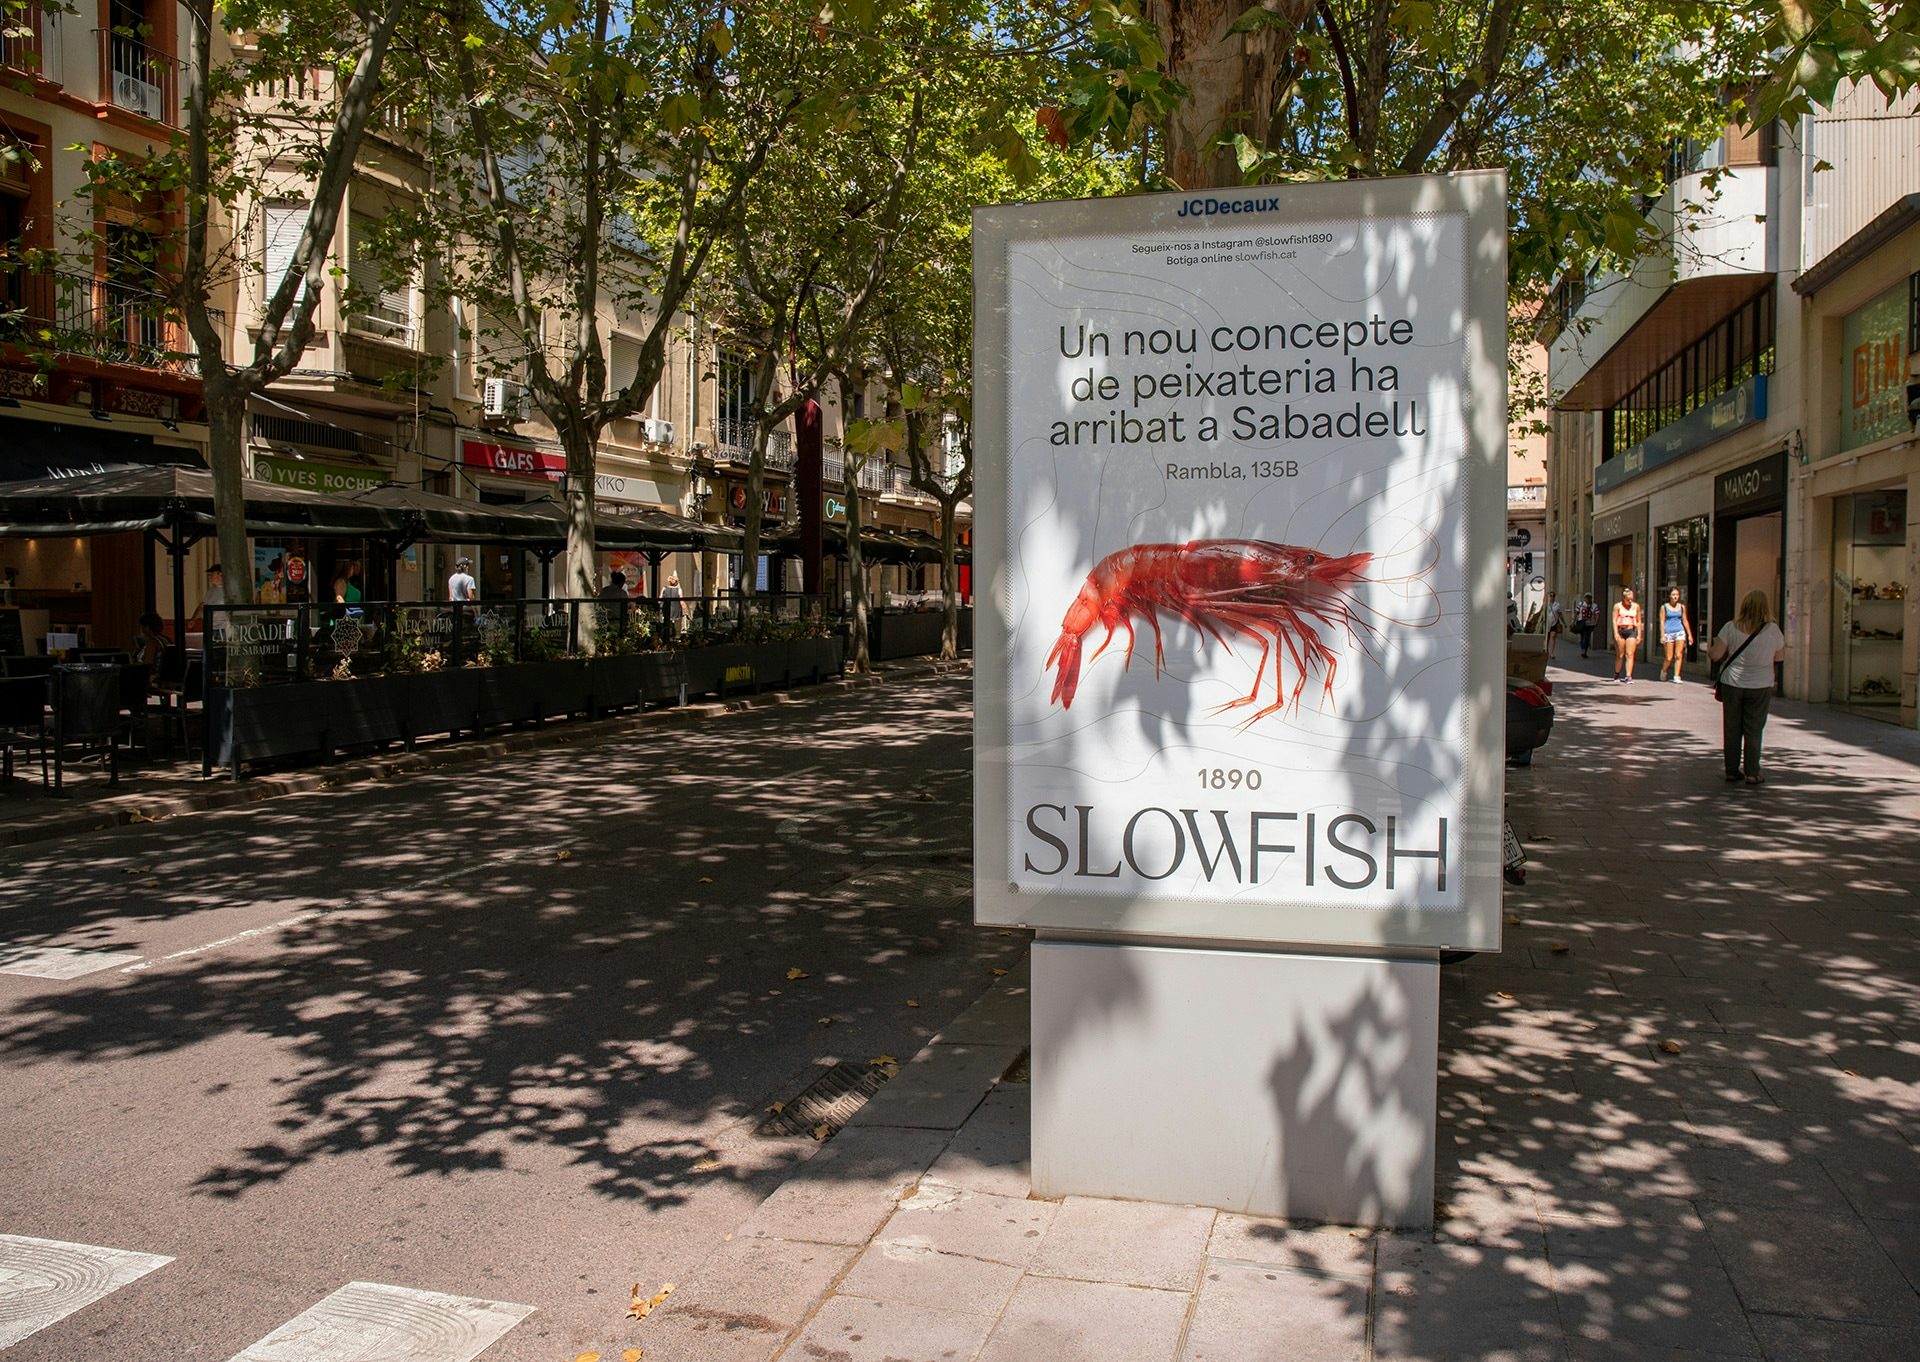 Photograph of a sign featuring the Slowfish branding by Vasava, featuring an illustration of a shrimp